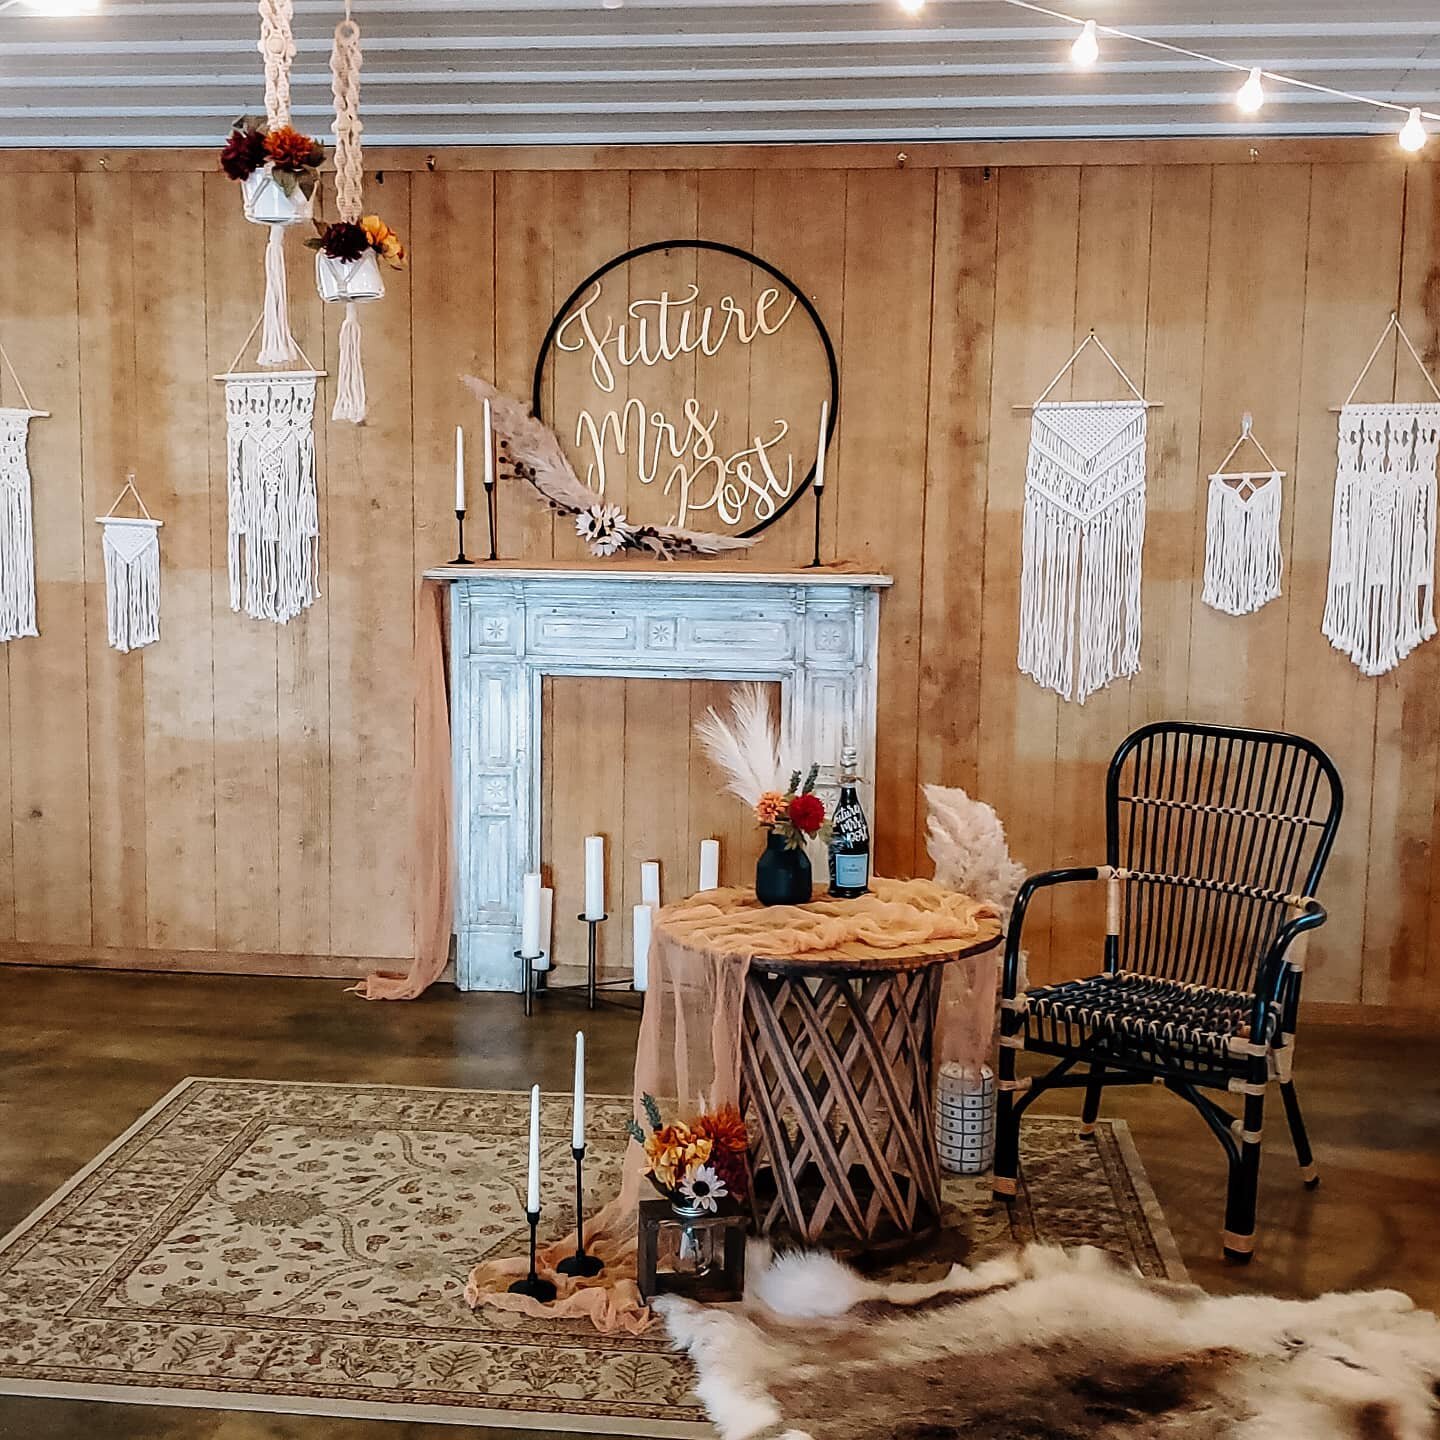 To create a more boho feel, we removed the white frame mirrors, added macrame to the walls and hung planters. Some black accents helped add a little moodiness. 
.
For your event design and rental needs, check out the link in bio!